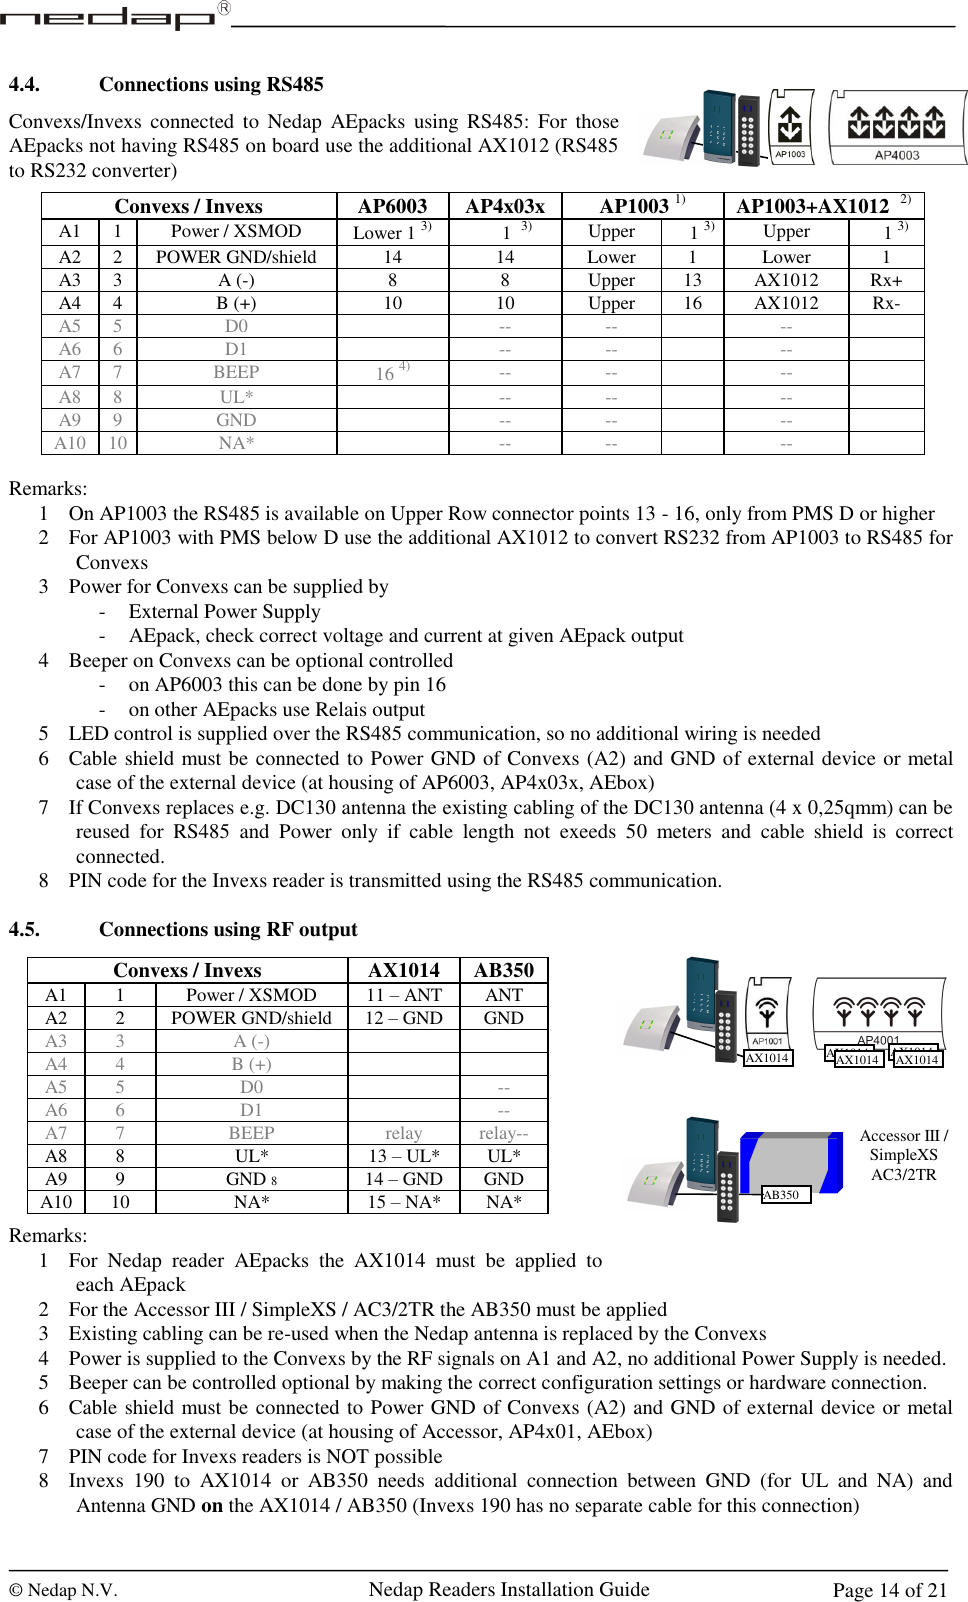  © Nedap N.V.                   Nedap Readers Installation Guide     Page 14 of 21 4.4. Connections using RS485 Convexs/Invexs  connected  to  Nedap  AEpacks  using RS485:  For those AEpacks not having RS485 on board use the additional AX1012 (RS485 to RS232 converter)             Remarks: 1 On AP1003 the RS485 is available on Upper Row connector points 13 - 16, only from PMS D or higher 2 For AP1003 with PMS below D use the additional AX1012 to convert RS232 from AP1003 to RS485 for Convexs 3 Power for Convexs can be supplied by - External Power Supply - AEpack, check correct voltage and current at given AEpack output 4 Beeper on Convexs can be optional controlled - on AP6003 this can be done by pin 16 - on other AEpacks use Relais output 5 LED control is supplied over the RS485 communication, so no additional wiring is needed 6 Cable shield must be connected to Power GND of Convexs (A2) and GND of external device or metal case of the external device (at housing of AP6003, AP4x03x, AEbox) 7 If Convexs replaces e.g. DC130 antenna the existing cabling of the DC130 antenna (4 x 0,25qmm) can be reused  for  RS485  and  Power  only  if  cable  length  not  exeeds  50  meters  and  cable  shield  is  correct connected. 8 PIN code for the Invexs reader is transmitted using the RS485 communication.  4.5. Connections using RF output            Remarks: 1 For  Nedap  reader  AEpacks  the  AX1014  must  be  applied  to each AEpack 2 For the Accessor III / SimpleXS / AC3/2TR the AB350 must be applied 3 Existing cabling can be re-used when the Nedap antenna is replaced by the Convexs 4 Power is supplied to the Convexs by the RF signals on A1 and A2, no additional Power Supply is needed. 5 Beeper can be controlled optional by making the correct configuration settings or hardware connection. 6 Cable shield must be connected to Power GND of Convexs (A2) and GND of external device or metal case of the external device (at housing of Accessor, AP4x01, AEbox) 7 PIN code for Invexs readers is NOT possible 8 Invexs  190  to  AX1014  or  AB350  needs  additional  connection  between  GND  (for  UL  and  NA)  and Antenna GND on the AX1014 / AB350 (Invexs 190 has no separate cable for this connection) AX1014 AX1014 AX1014 AX1014 AX1014 Accessor III / SimpleXS AC3/2TR AB350 Convexs / Invexs AP6003 AP4x03x AP1003 1) AP1003+AX1012  2) A1 1 Power / XSMOD Lower 1 3)      1  3) Upper     1 3) Upper     1 3) A2 2 POWER GND/shield 14 14 Lower 1 Lower 1 A3 3 A (-) 8 8 Upper 13 AX1012 Rx+ A4 4 B (+) 10 10 Upper 16 AX1012 Rx- A5 5 D0  -- --  --  A6 6 D1  -- --  --  A7 7 BEEP 16 4) -- --  --  A8 8 UL*  -- --  --  A9 9 GND  -- --  --  A10 10 NA*  -- --  --   Convexs / Invexs AX1014 AB350 A1 1 Power / XSMOD 11 – ANT ANT A2 2 POWER GND/shield 12 – GND GND A3 3 A (-)   A4 4 B (+)   A5 5 D0  -- A6 6 D1  -- A7 7 BEEP relay relay-- A8 8 UL* 13 – UL* UL* A9 9 GND 8 14 – GND GND A10 10 NA* 15 – NA* NA*  1 2 3 4 5 6 7 8 9 C 0 E 1 2 3 4 5 6 7 8 9 C 0 E 1 2 3 4 5 6 7 8 9 C 0 E 